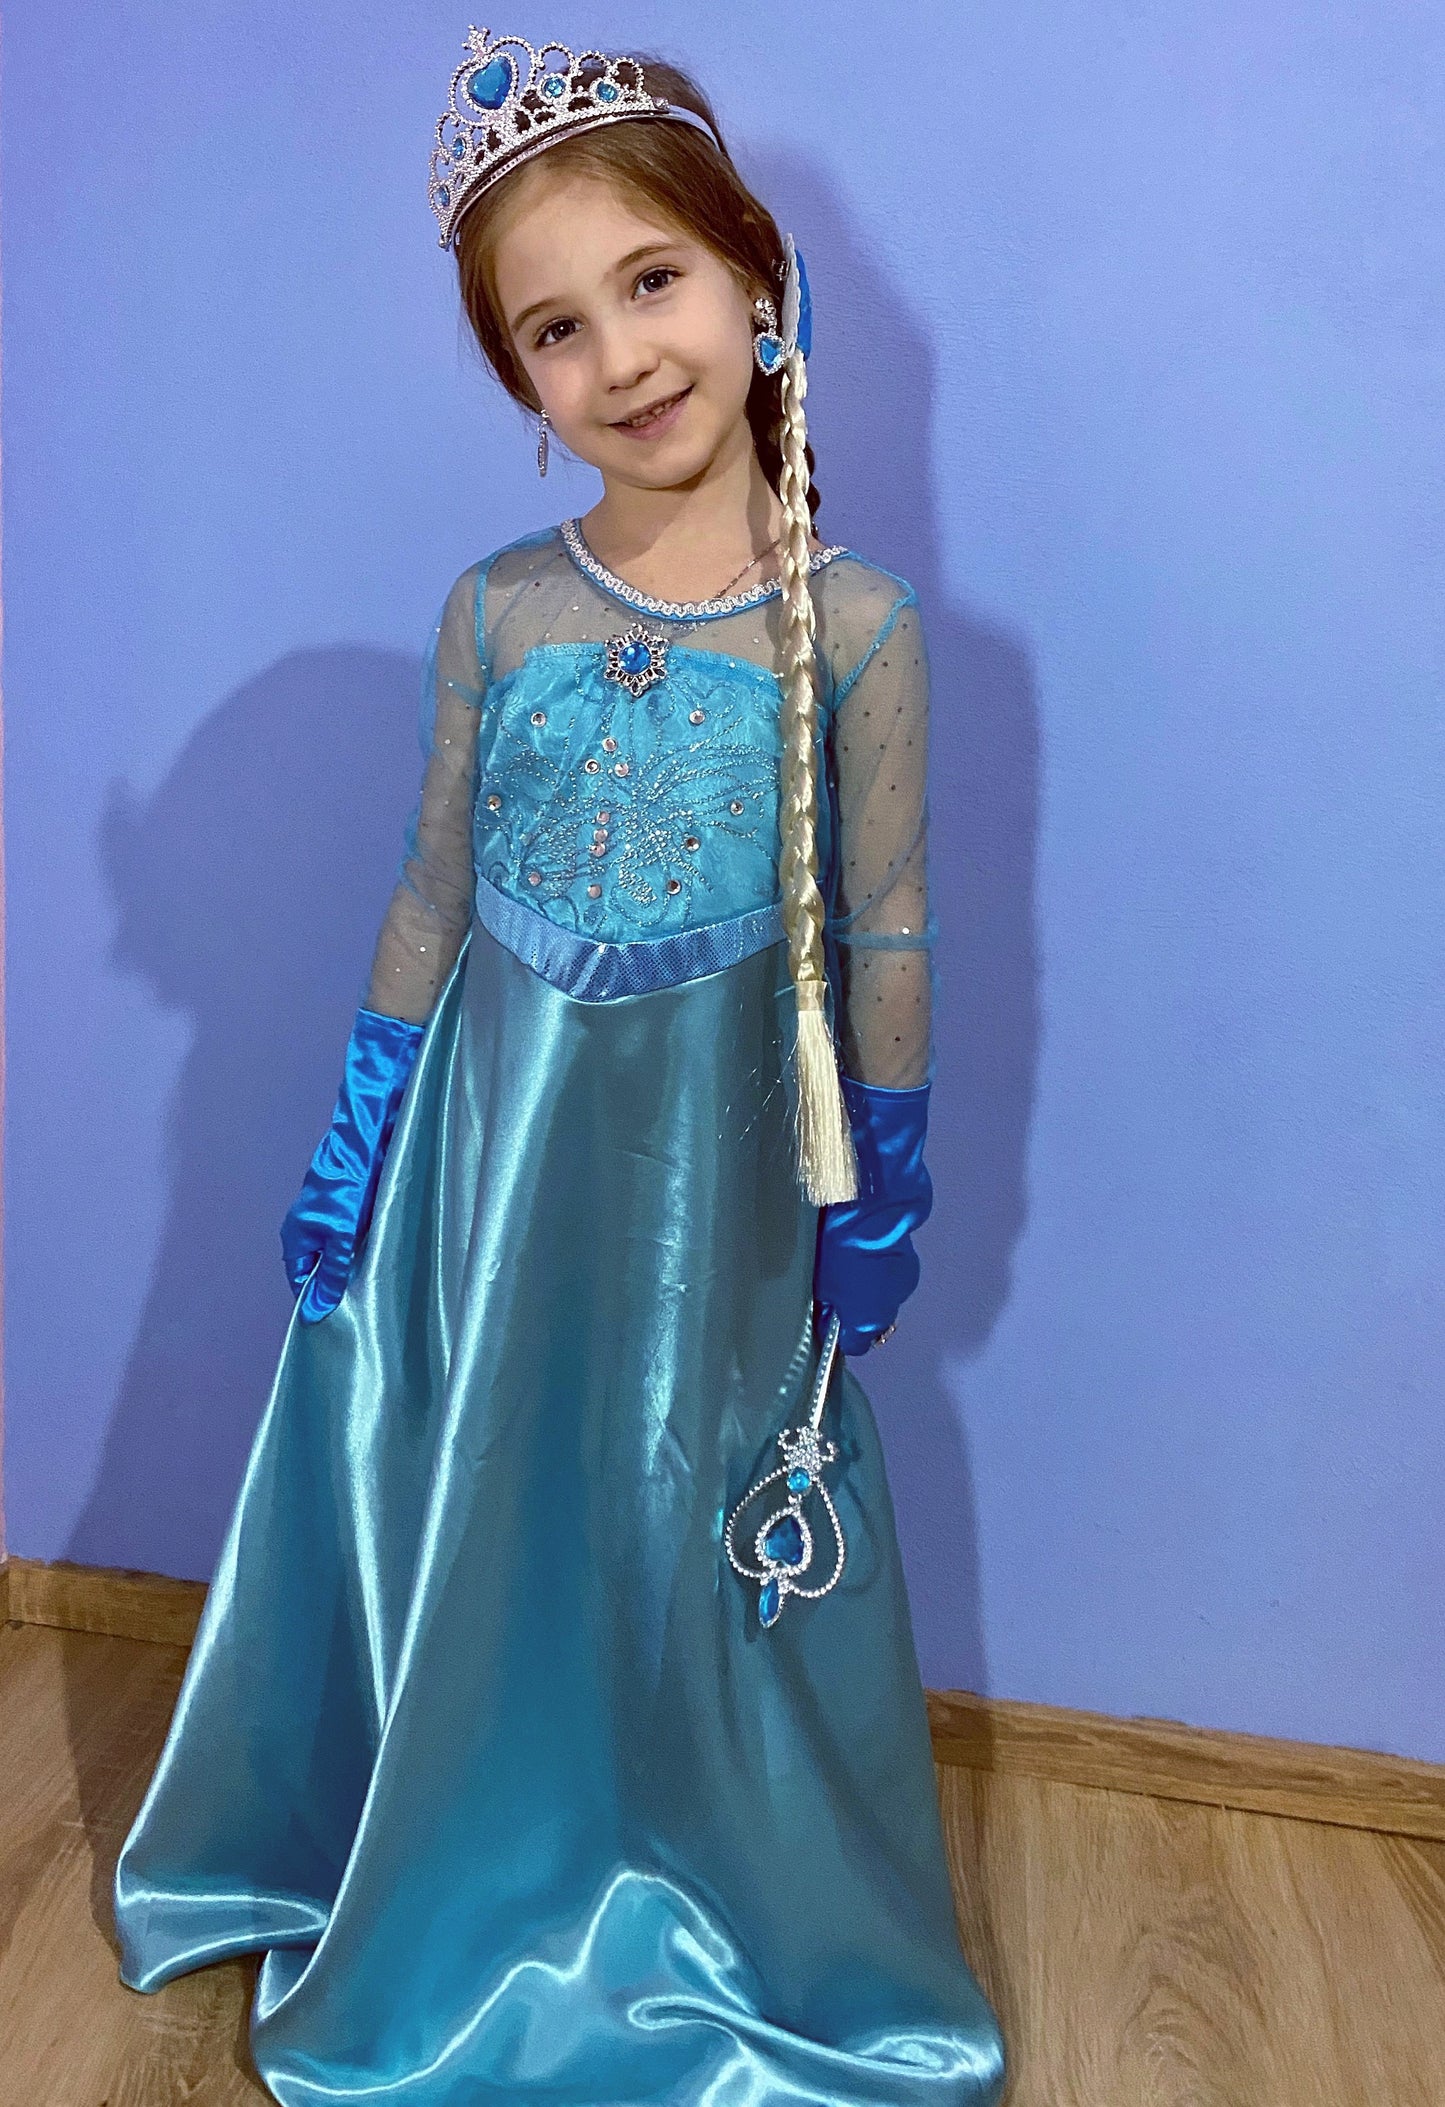 Princess Elsa Costume Dress - Long Sleeves with Accessories Set